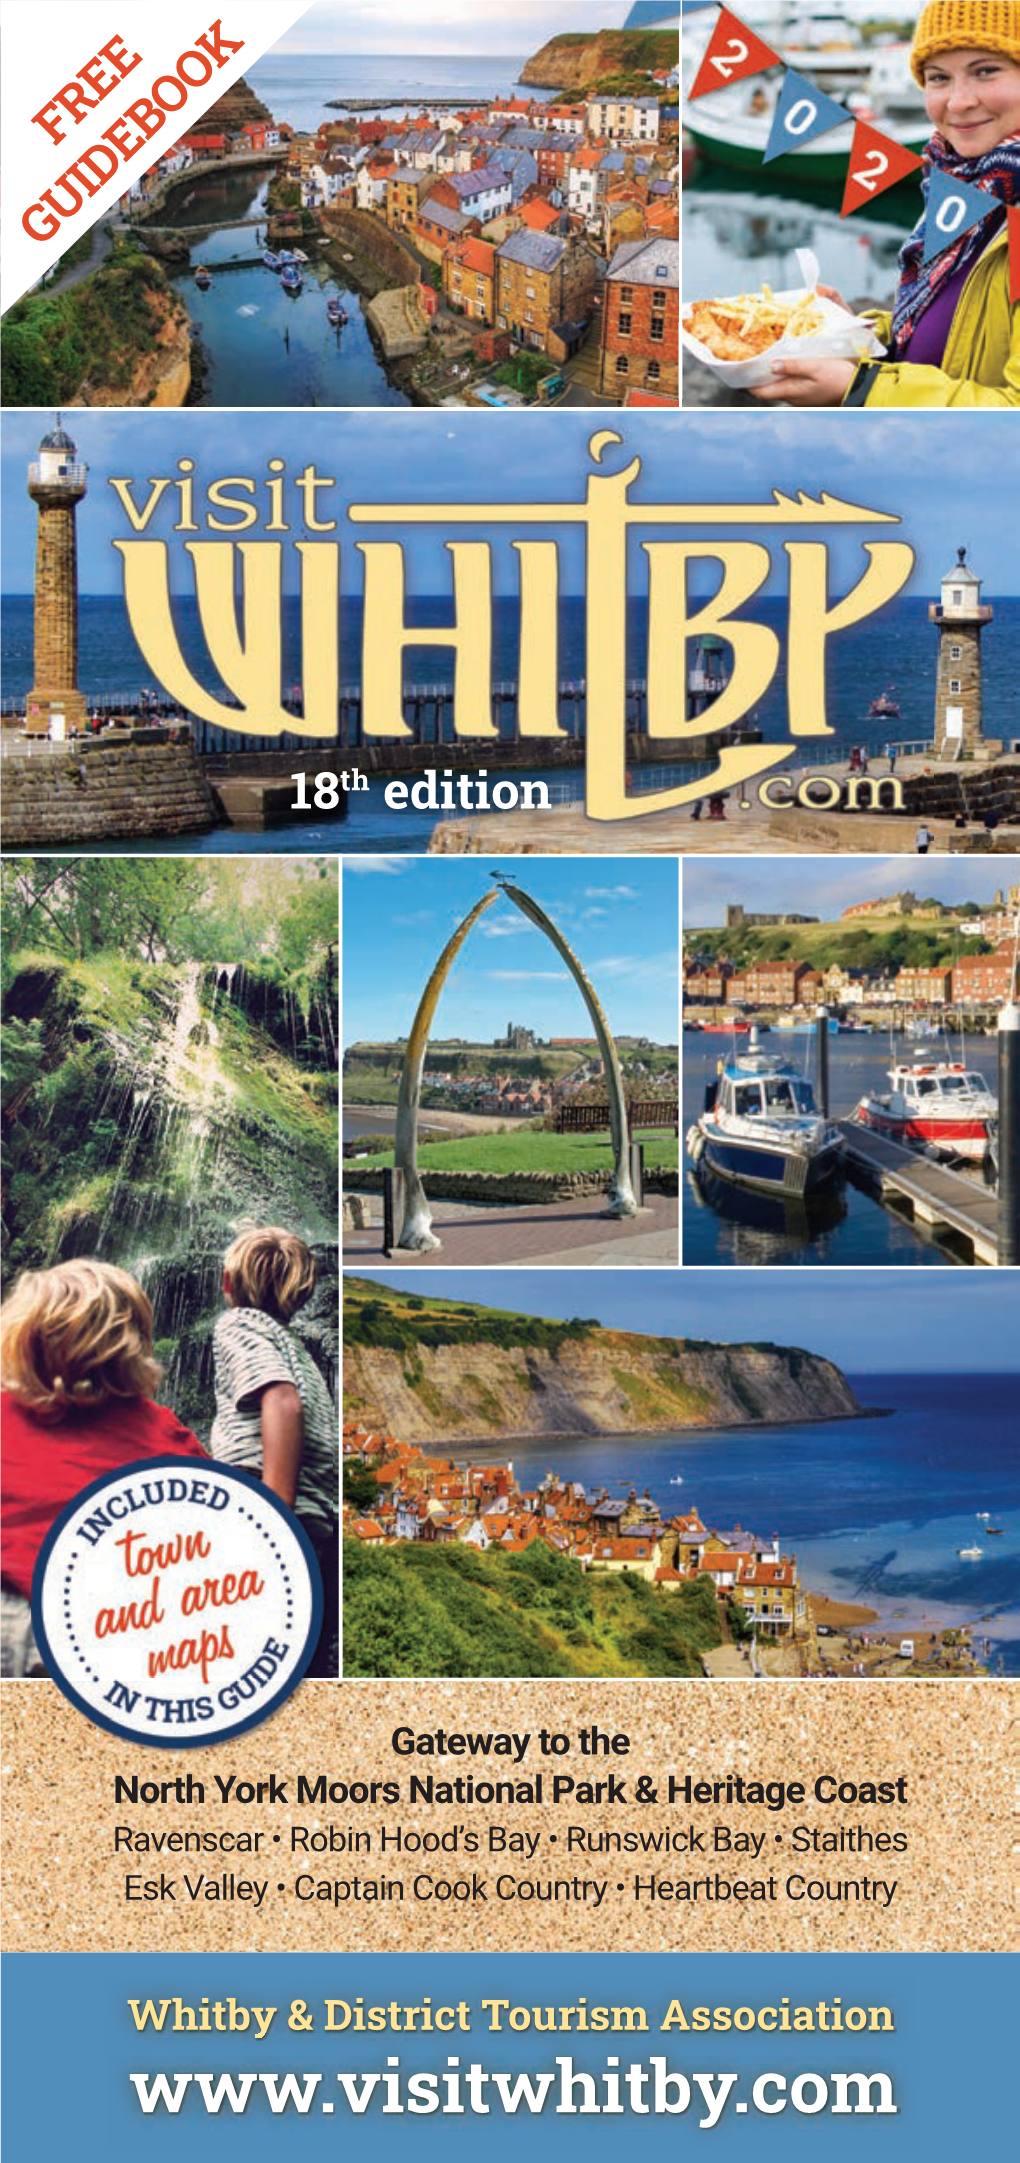 Robinson's Whitby